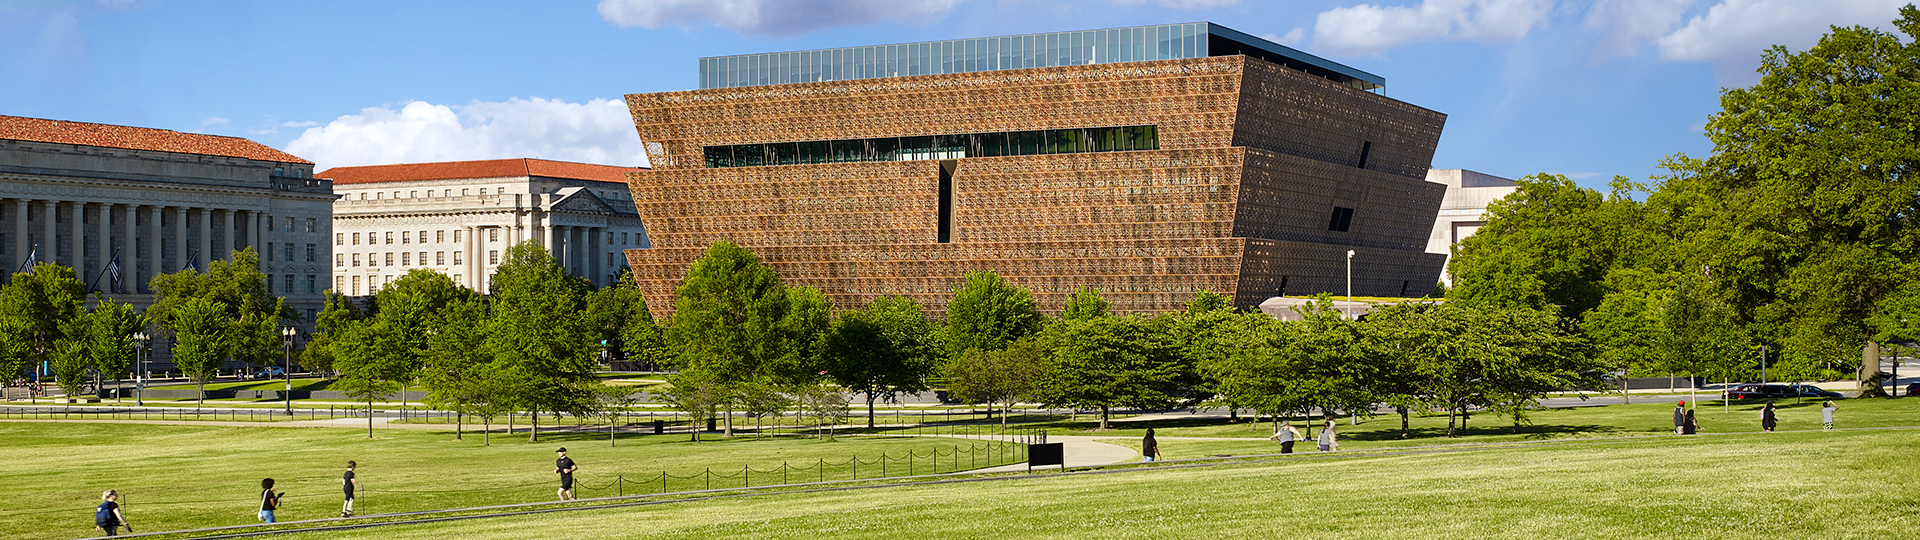 National Museum of African American History and Culture in der National Mall mit dem Washington Monument